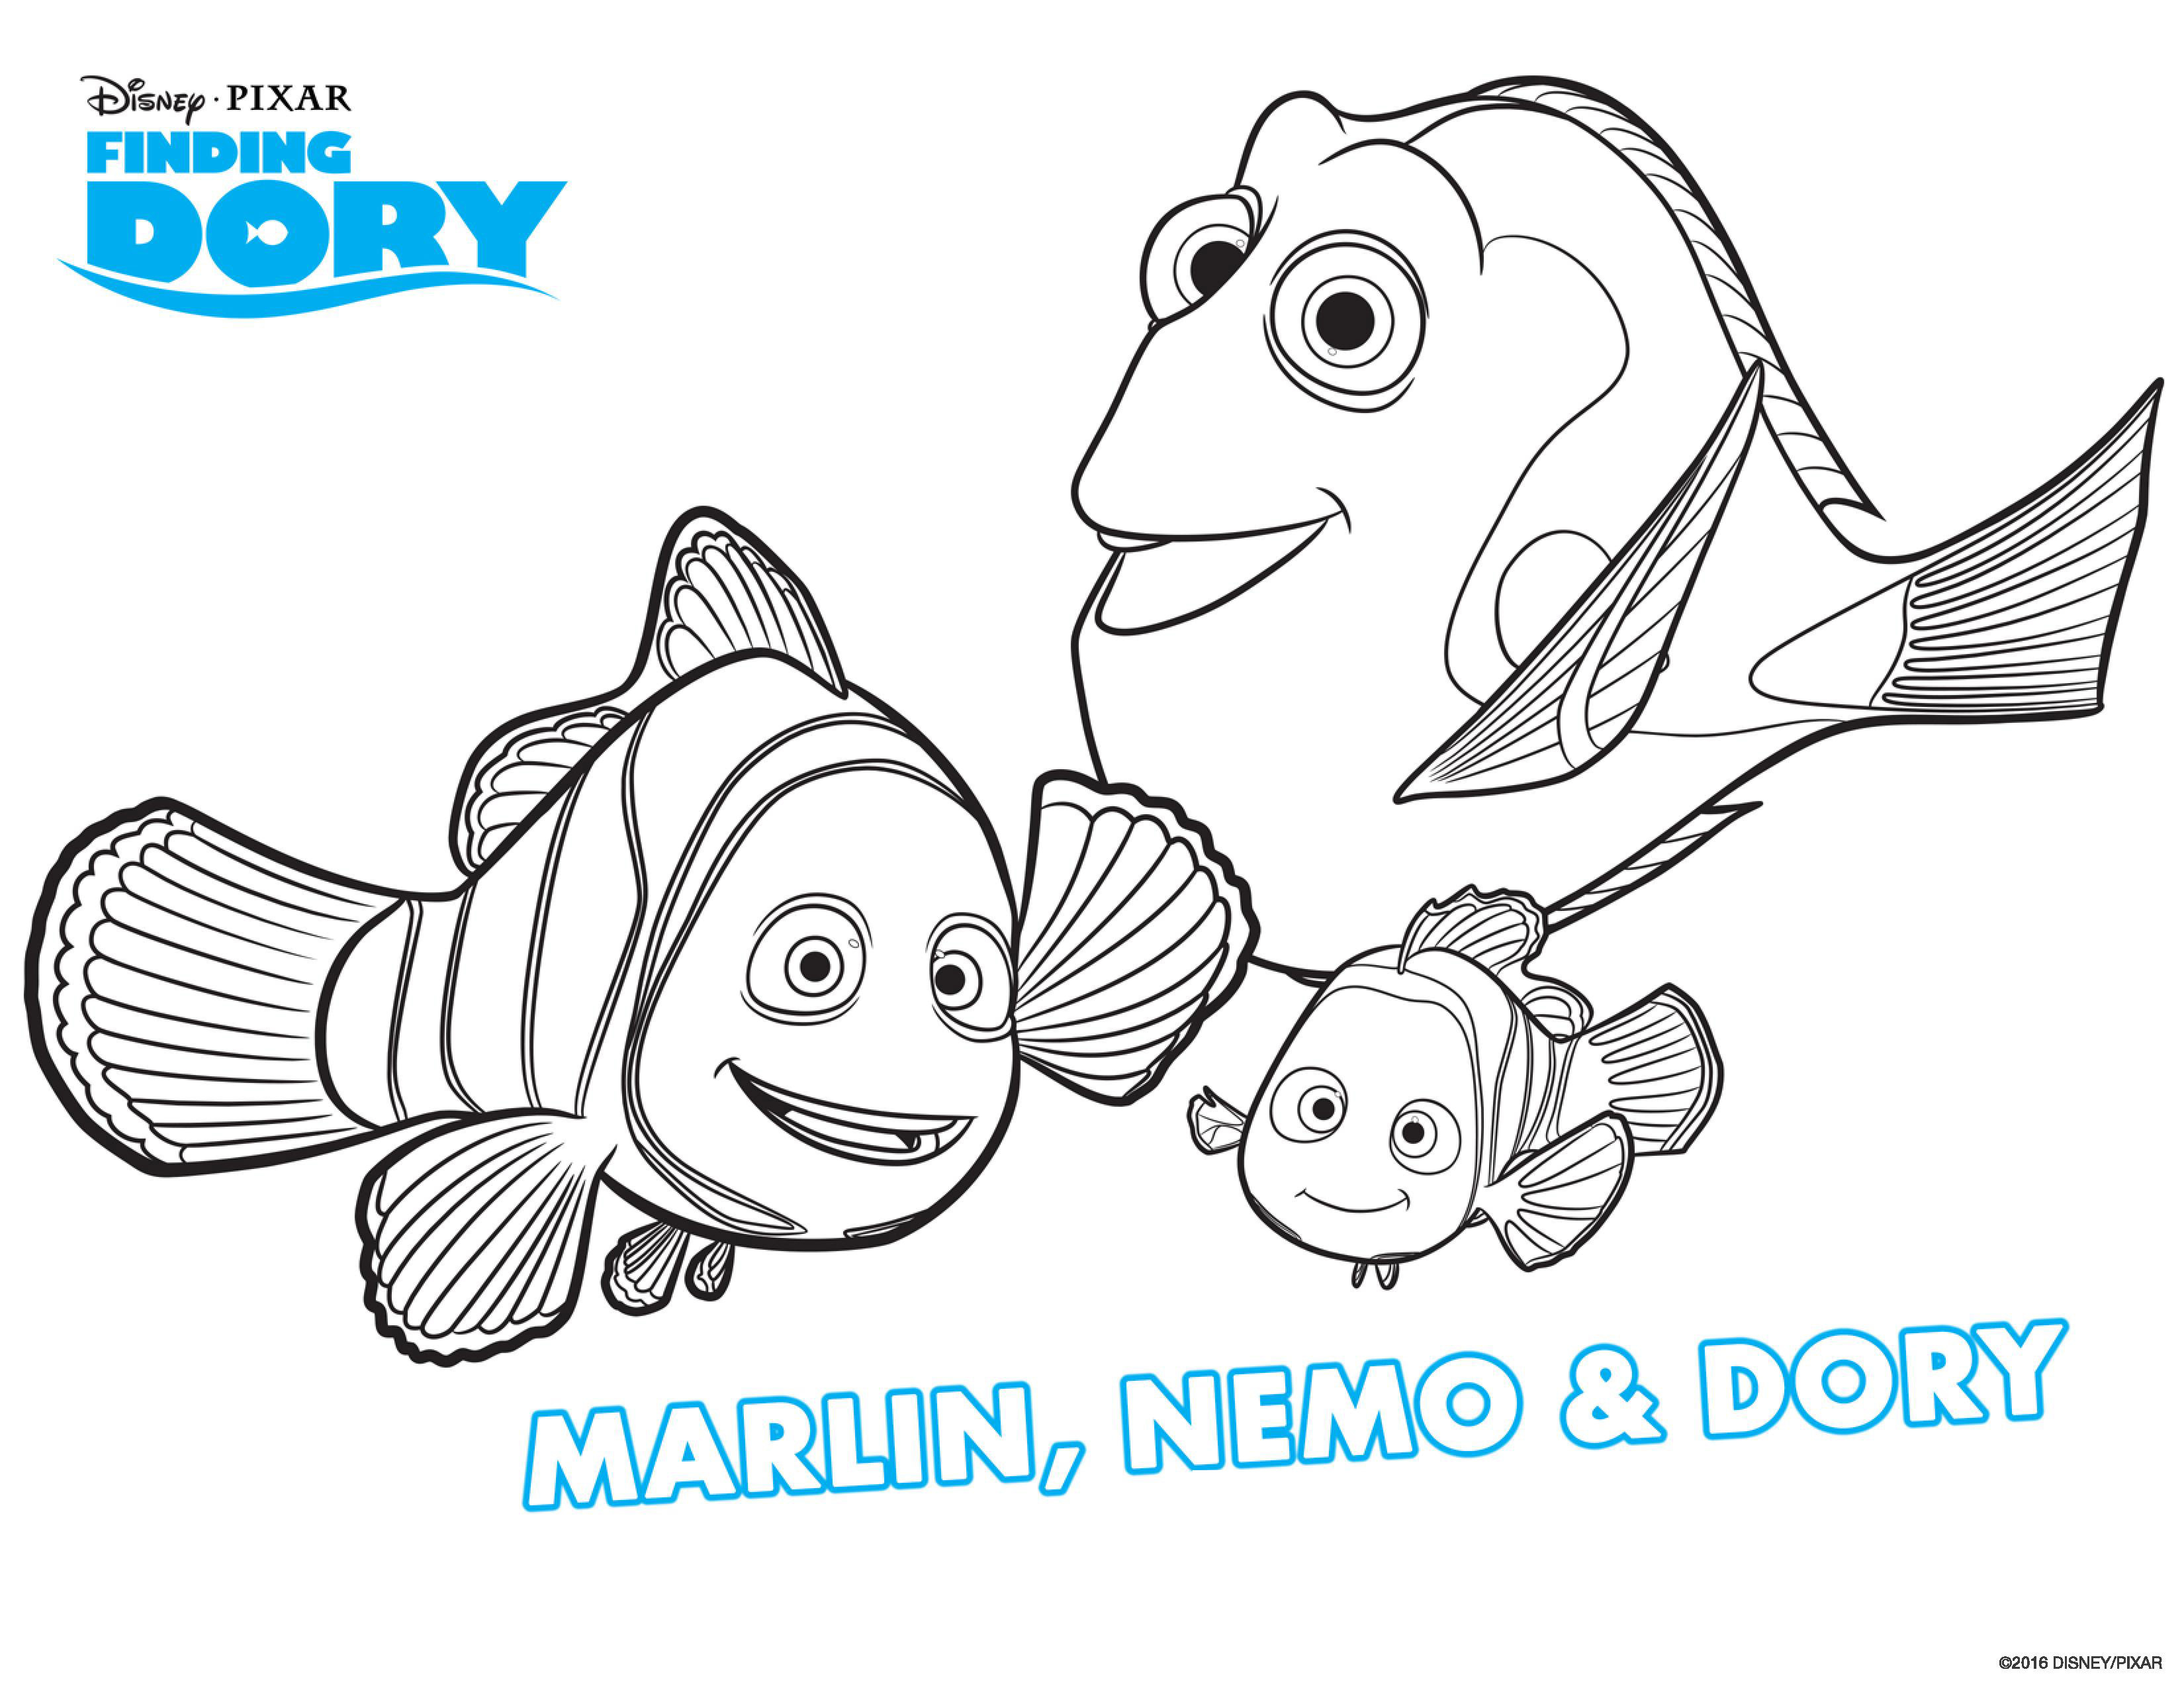 Finding Nemo Characters Coloring Pages Finding Dory To Color For Children Finding Dory Kids Coloring Pages